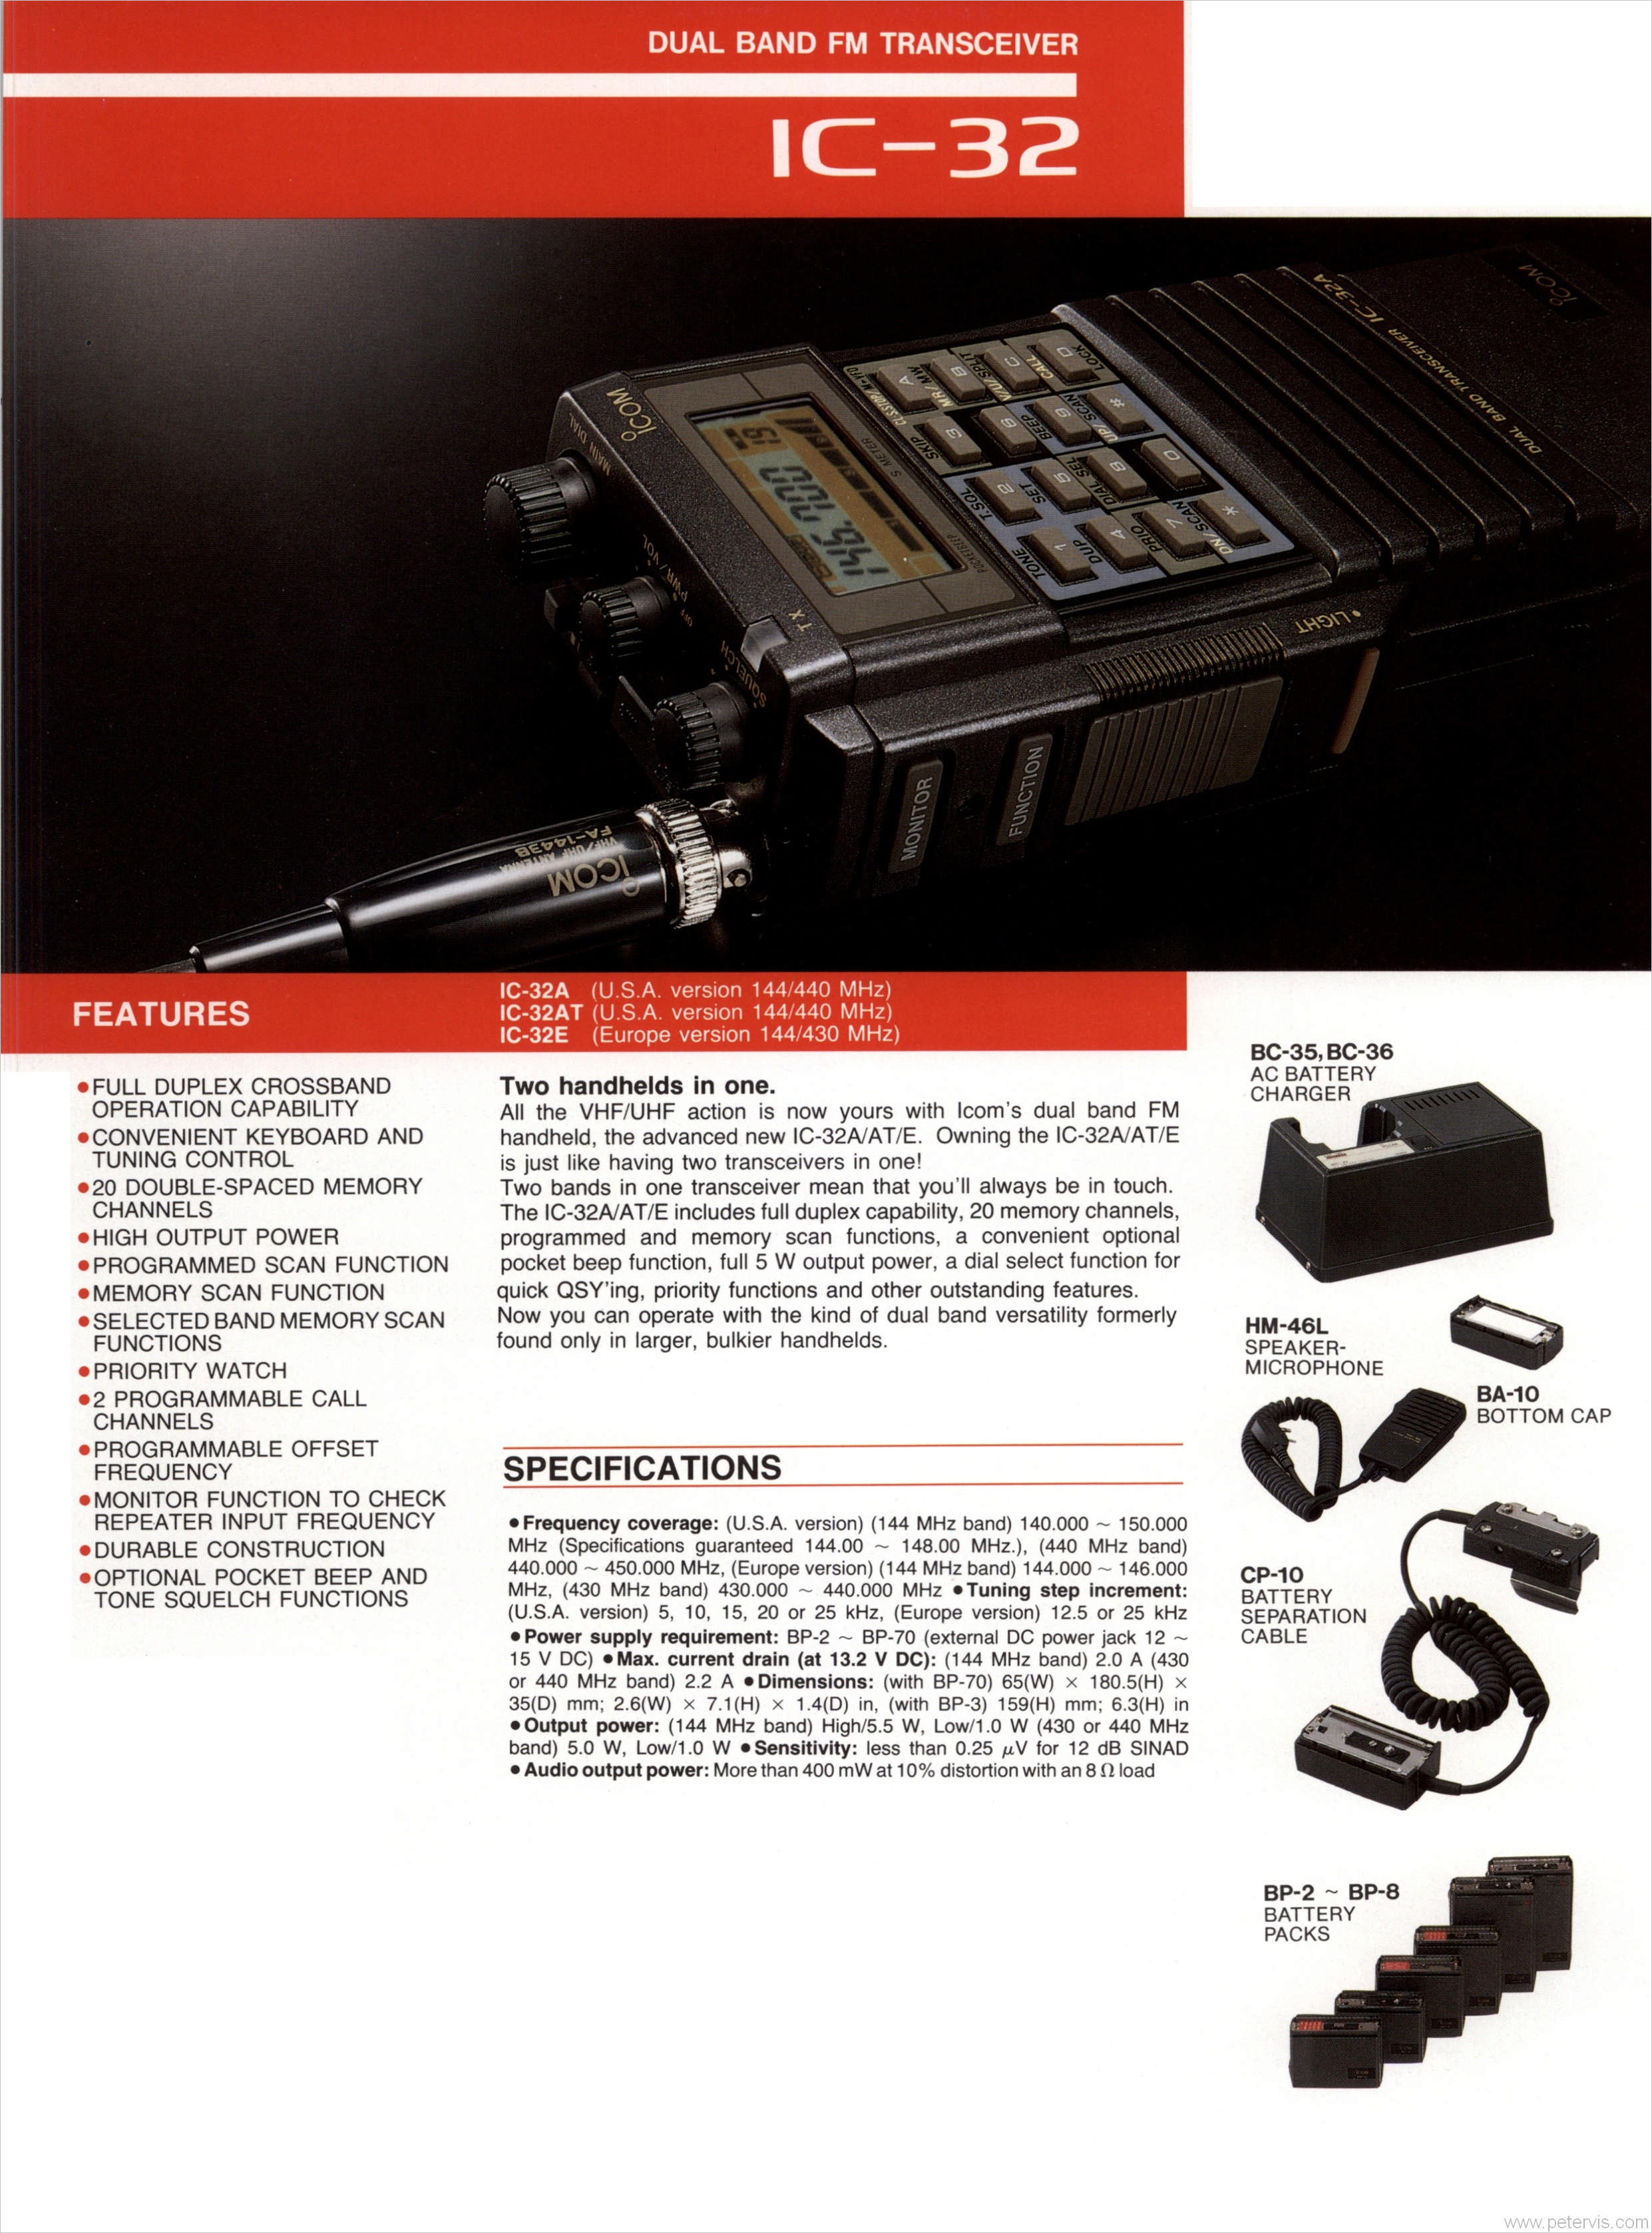 IC-32 SPECIFICATION and FEATURES